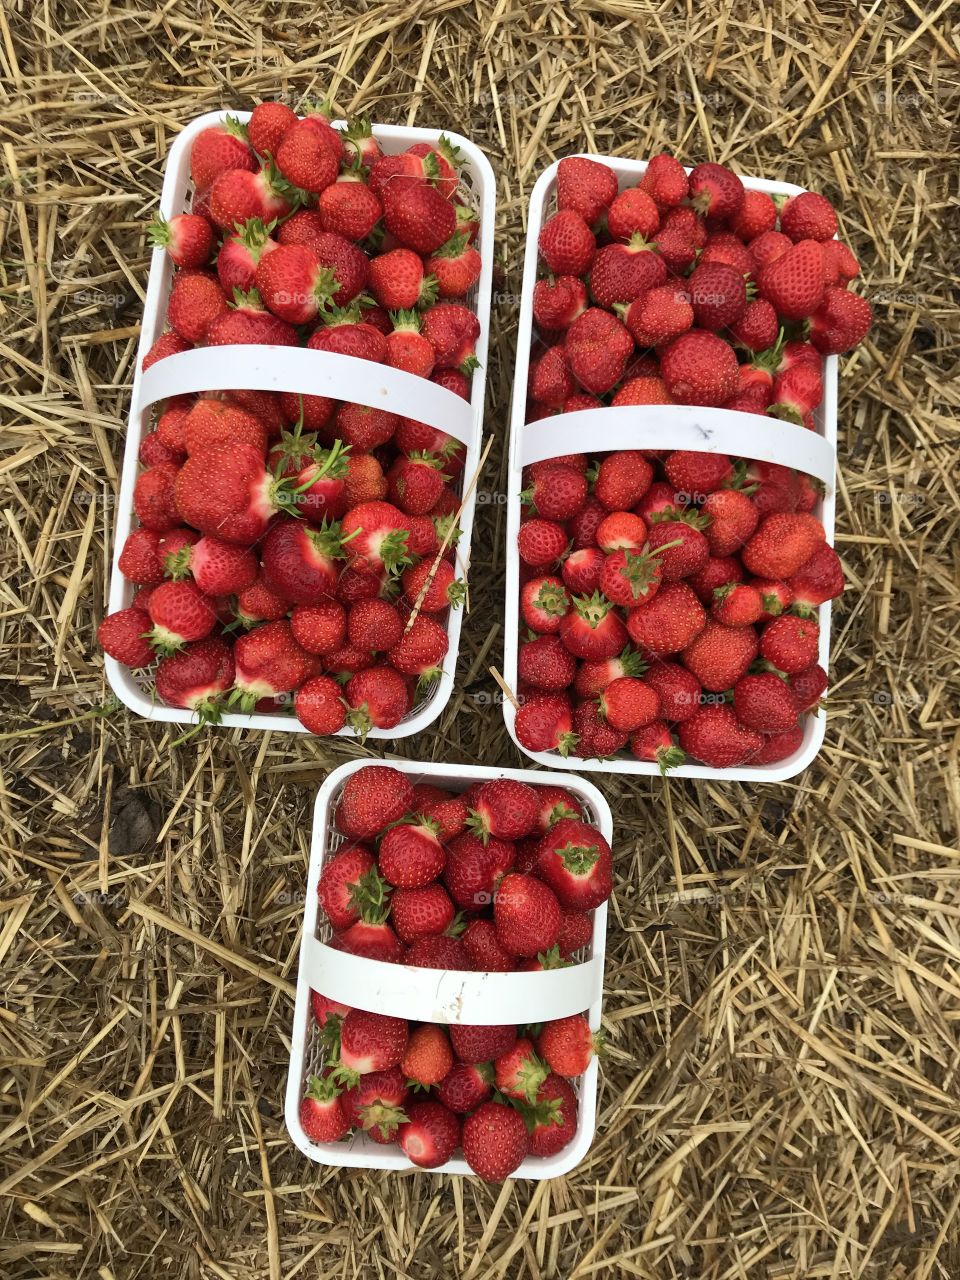 Fresh strawberries picked from the farm